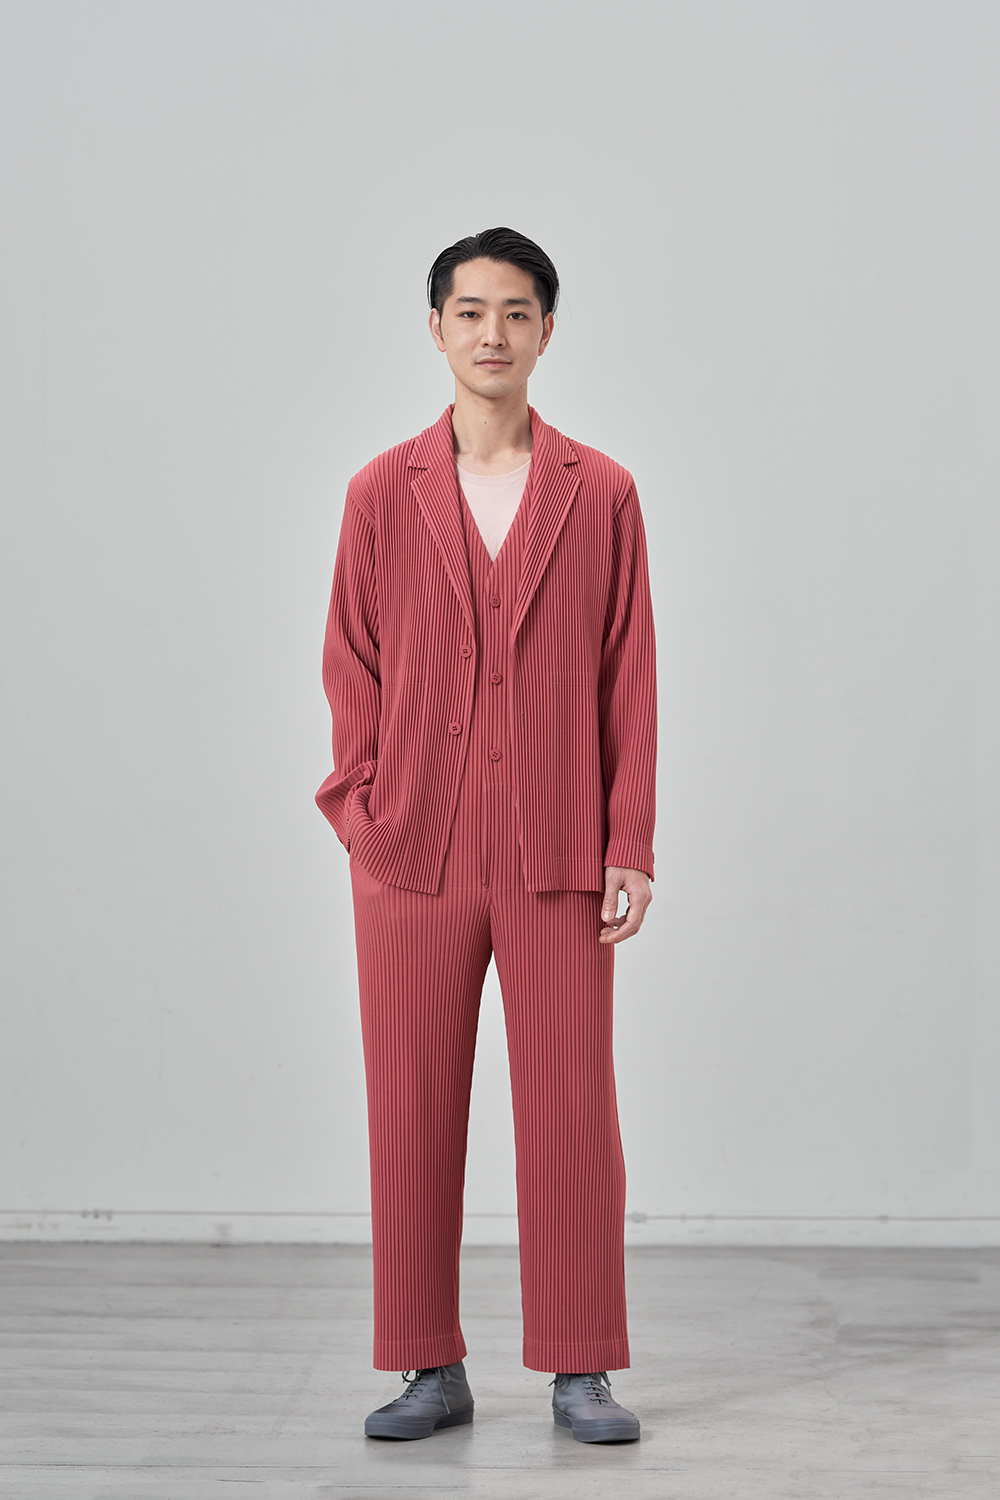 PFW: Homme Plissé Issey Miyake Autumn/Winter 2021 Collection